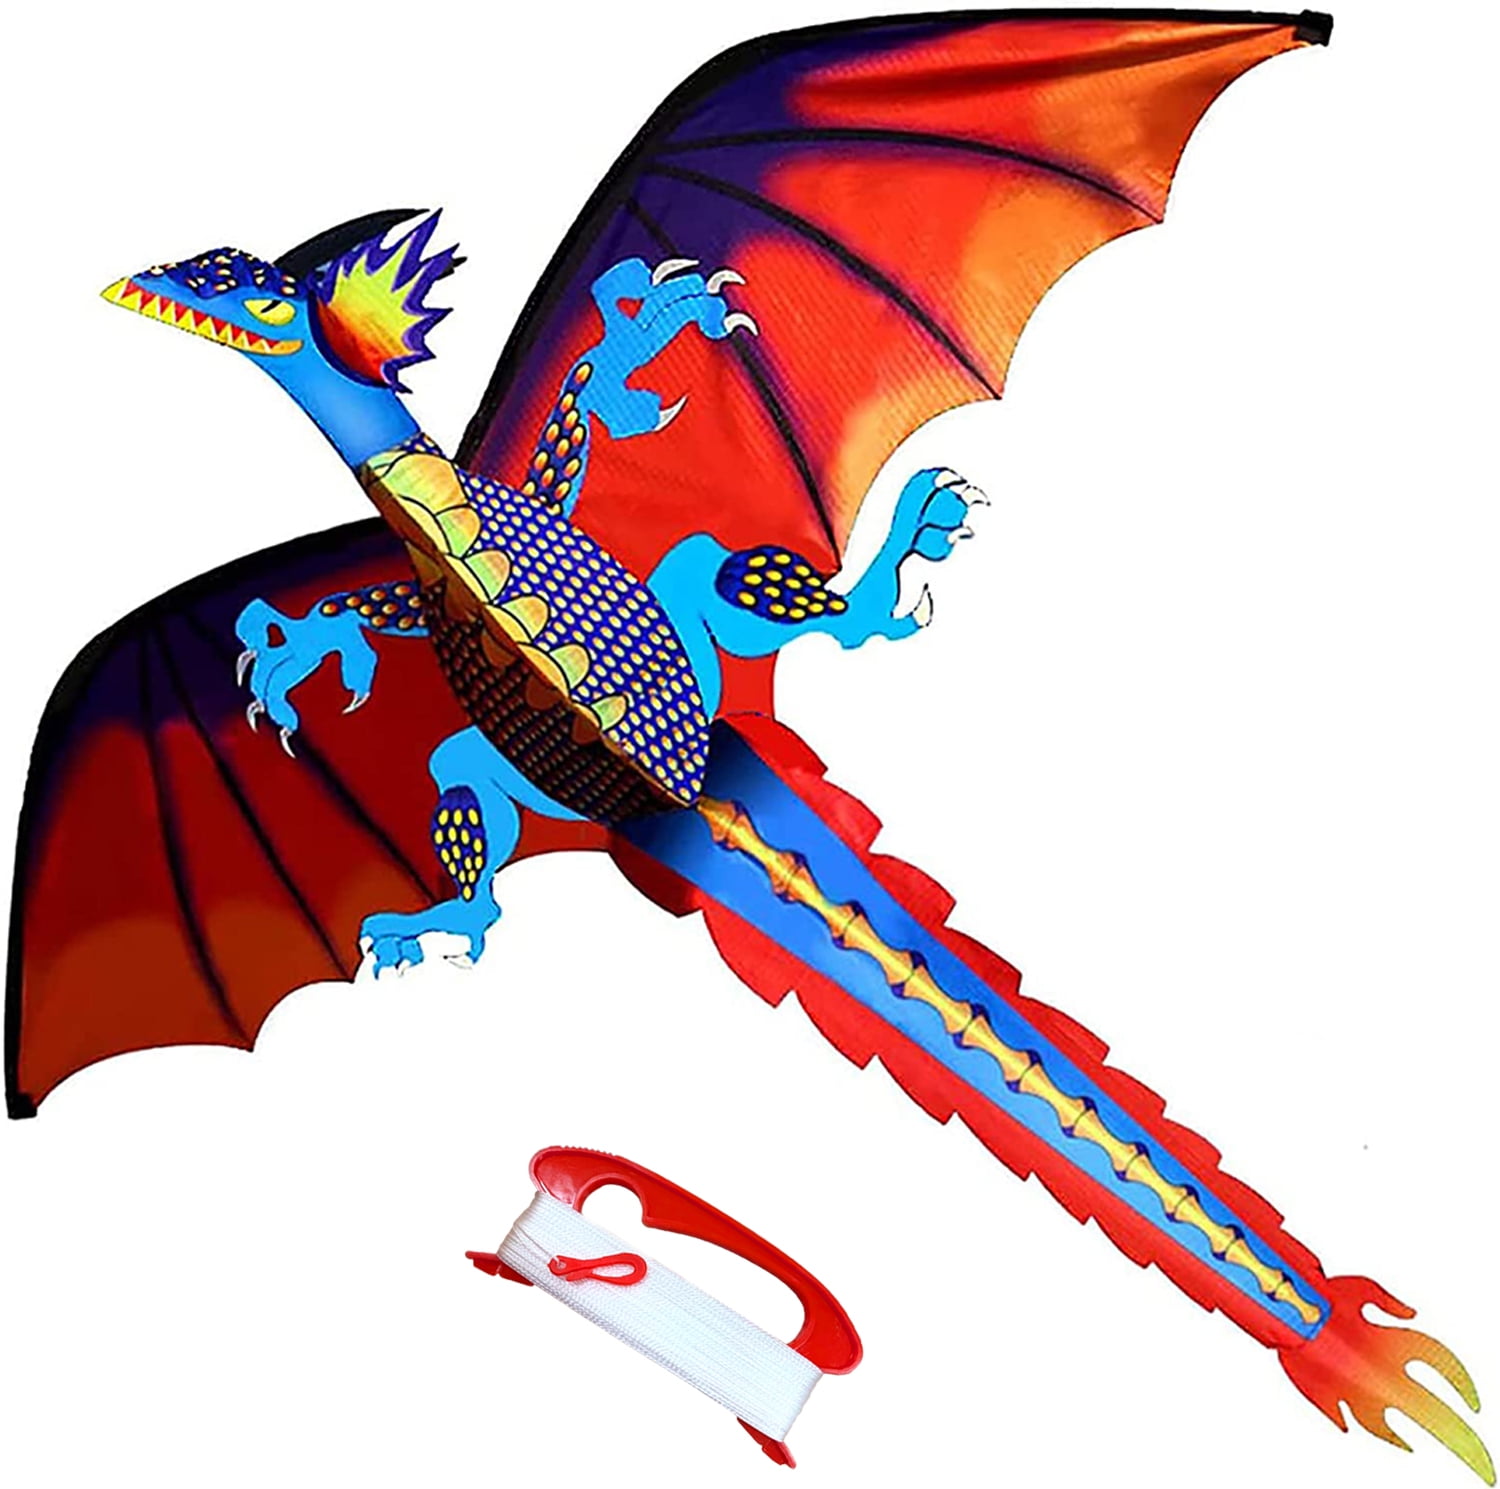 LED Lights Dragon Kite outdoor Easy to Fly Single Line With Tail and flying tool 